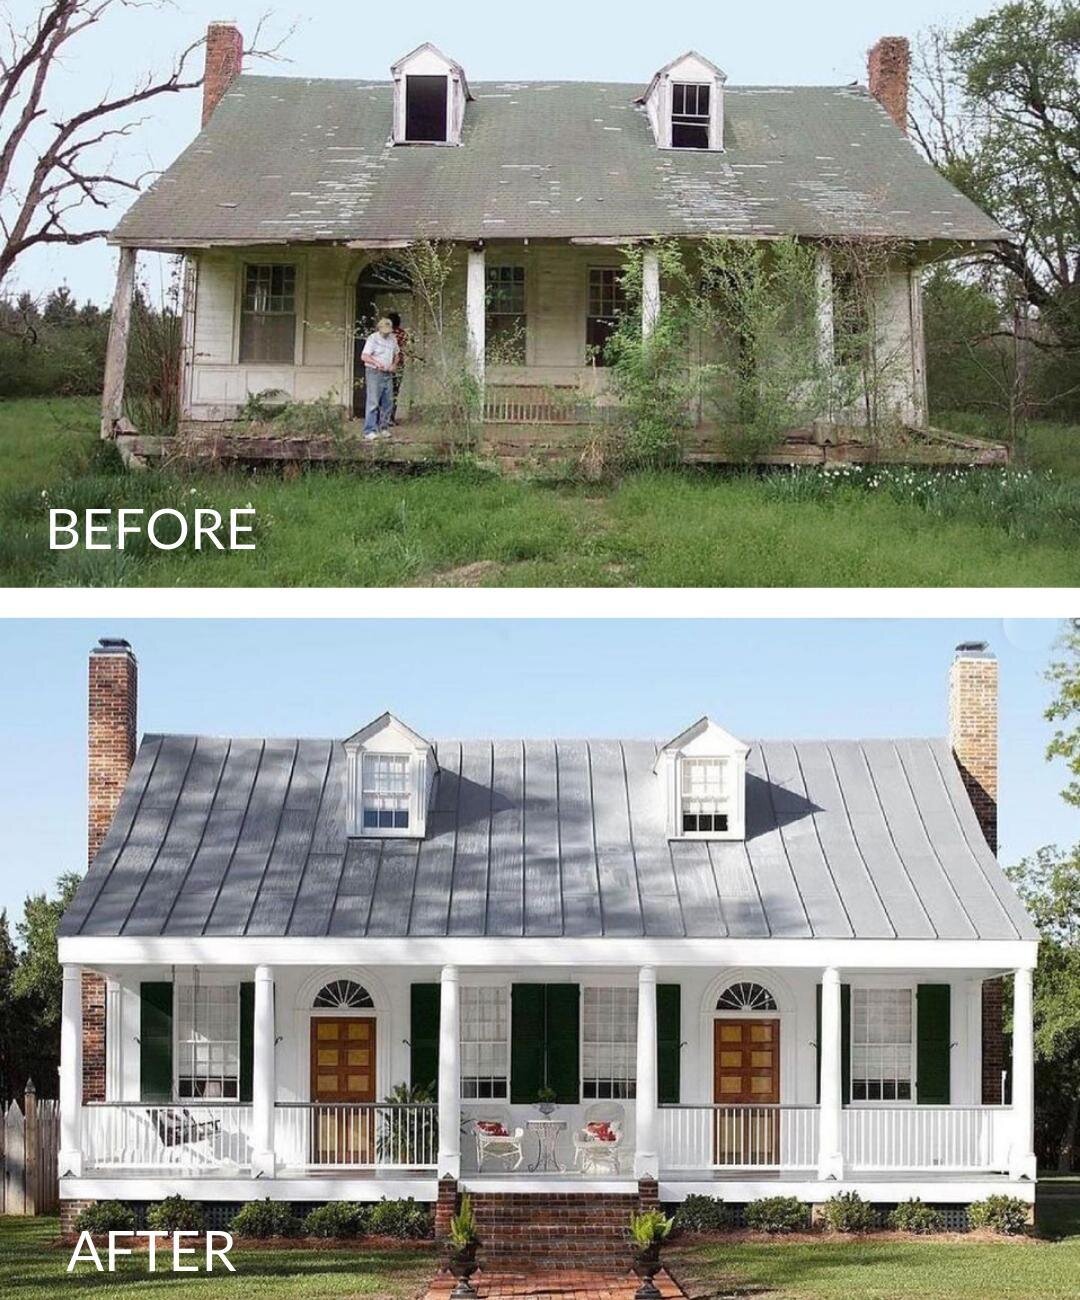 This is one show-stopping transformation! It&rsquo;s hard to believe it&rsquo;s the same property, and it&rsquo;s a great way of proving there is nothing you can't achieve when flipping a home. There is so much hidden potential in literally any home!